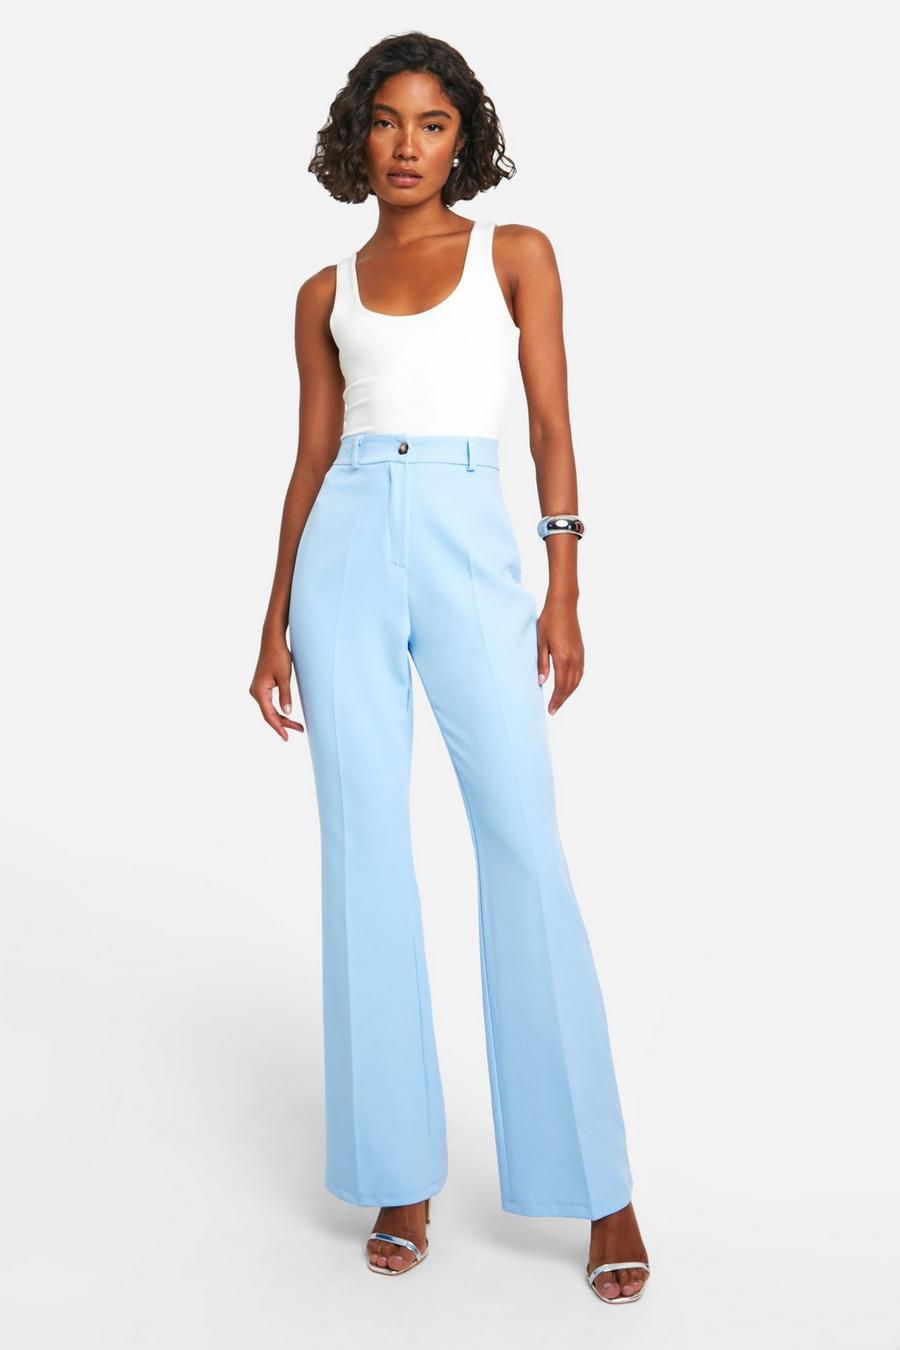 Baby blue Tall Woven Tailored Fit And Flare Pants